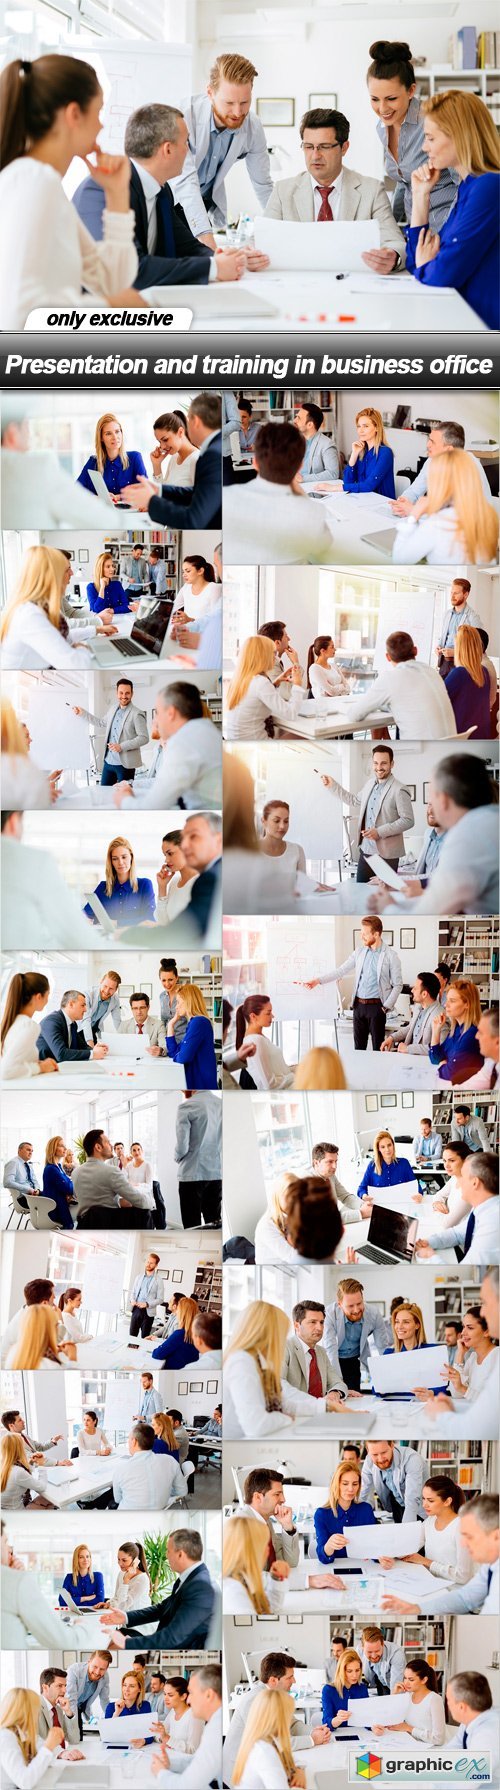 Presentation and training in business office - 19 UHQ JPEG